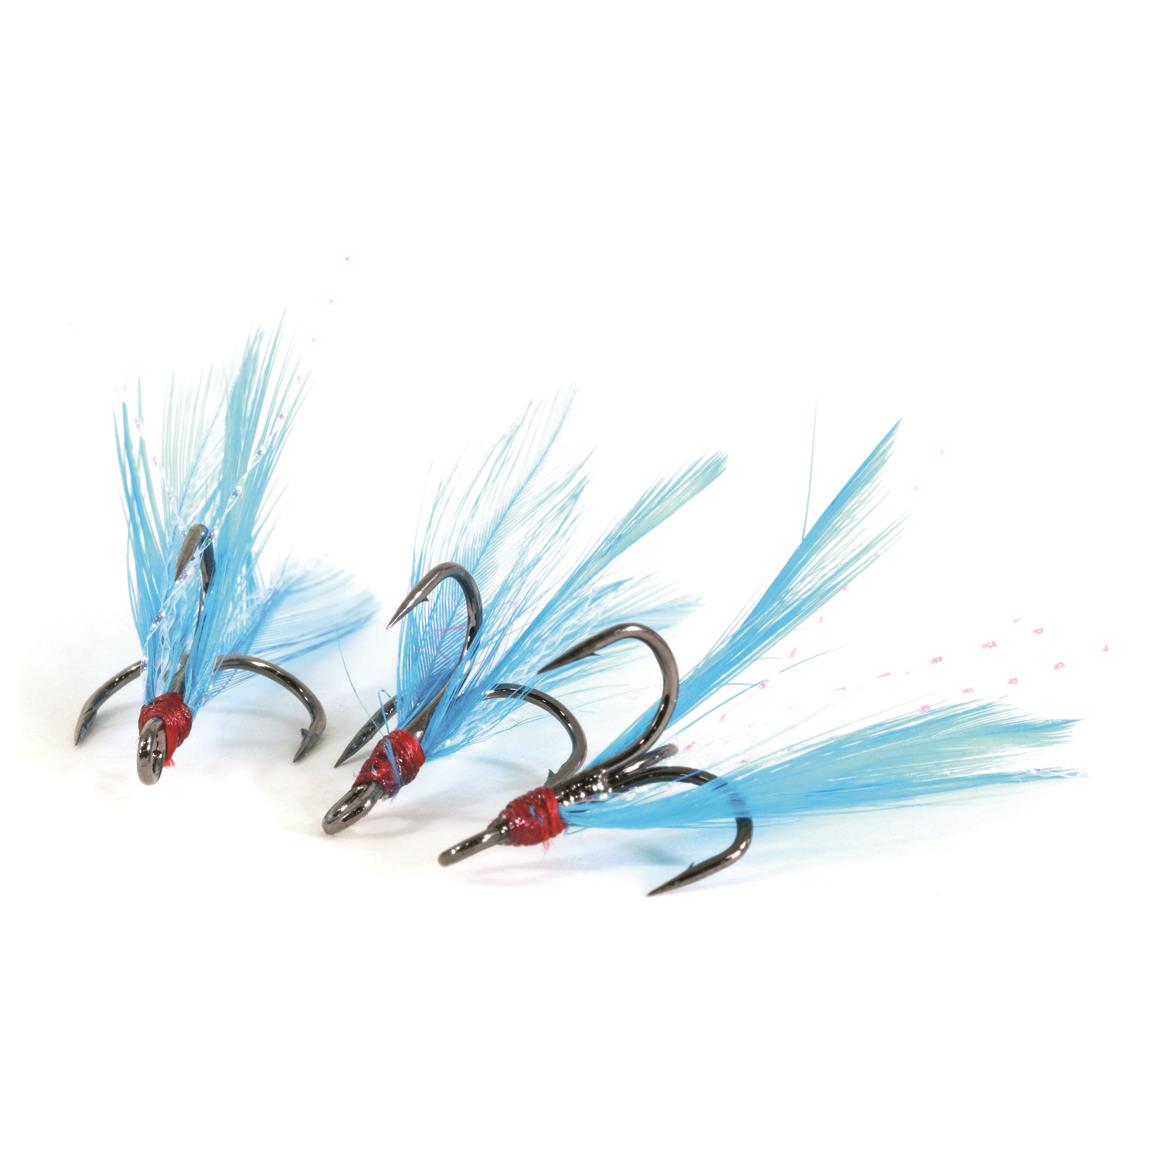 Clam Pro Tackle Feathered Gaff Treble Hooks, 3 Pack - 738208, Ice Tackle at  Sportsman's Guide